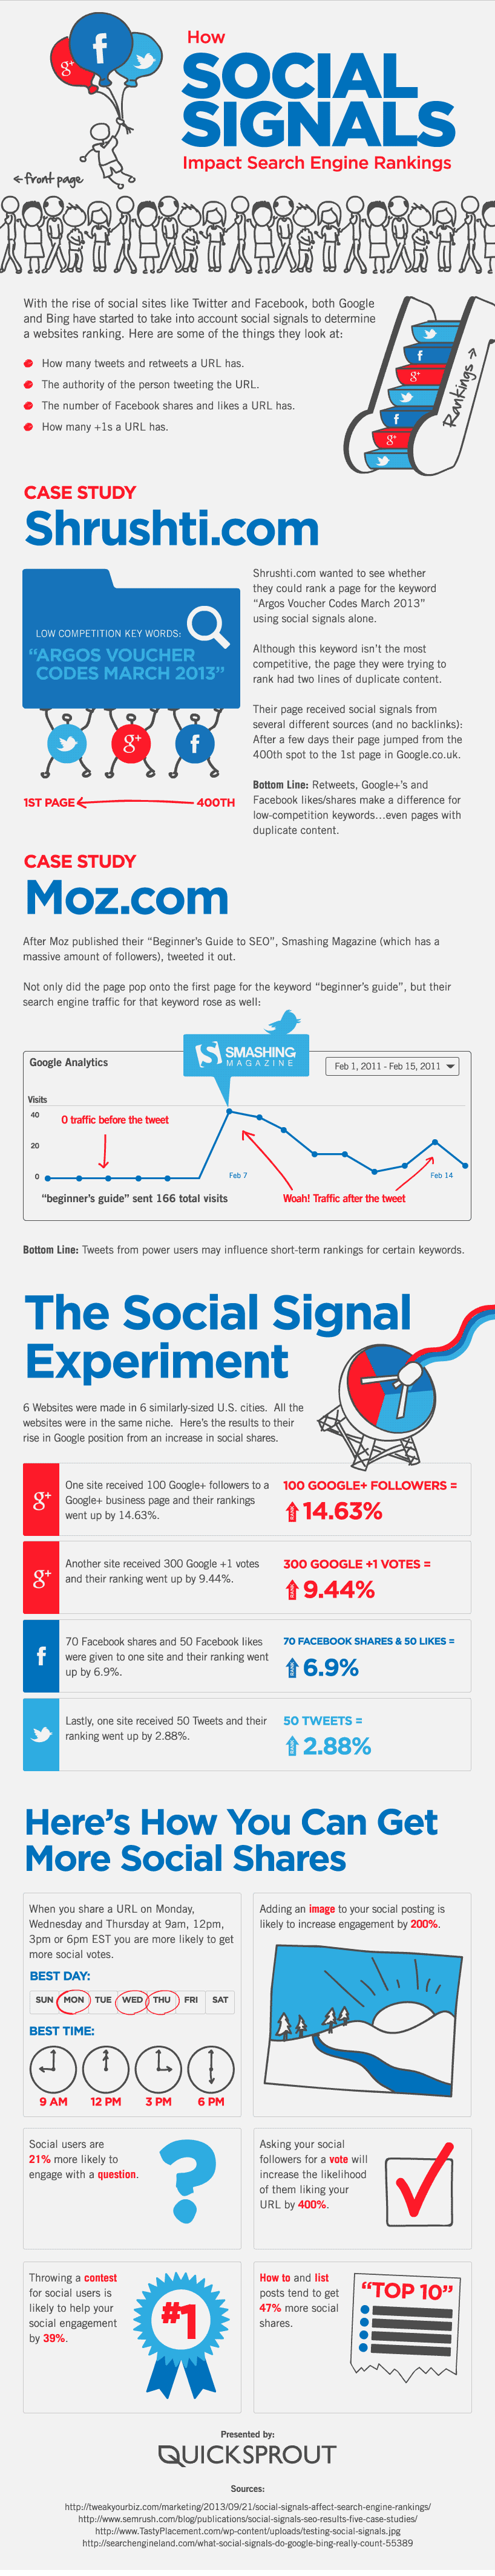 How Social Signals Impact Search Engine Rankings Infographic